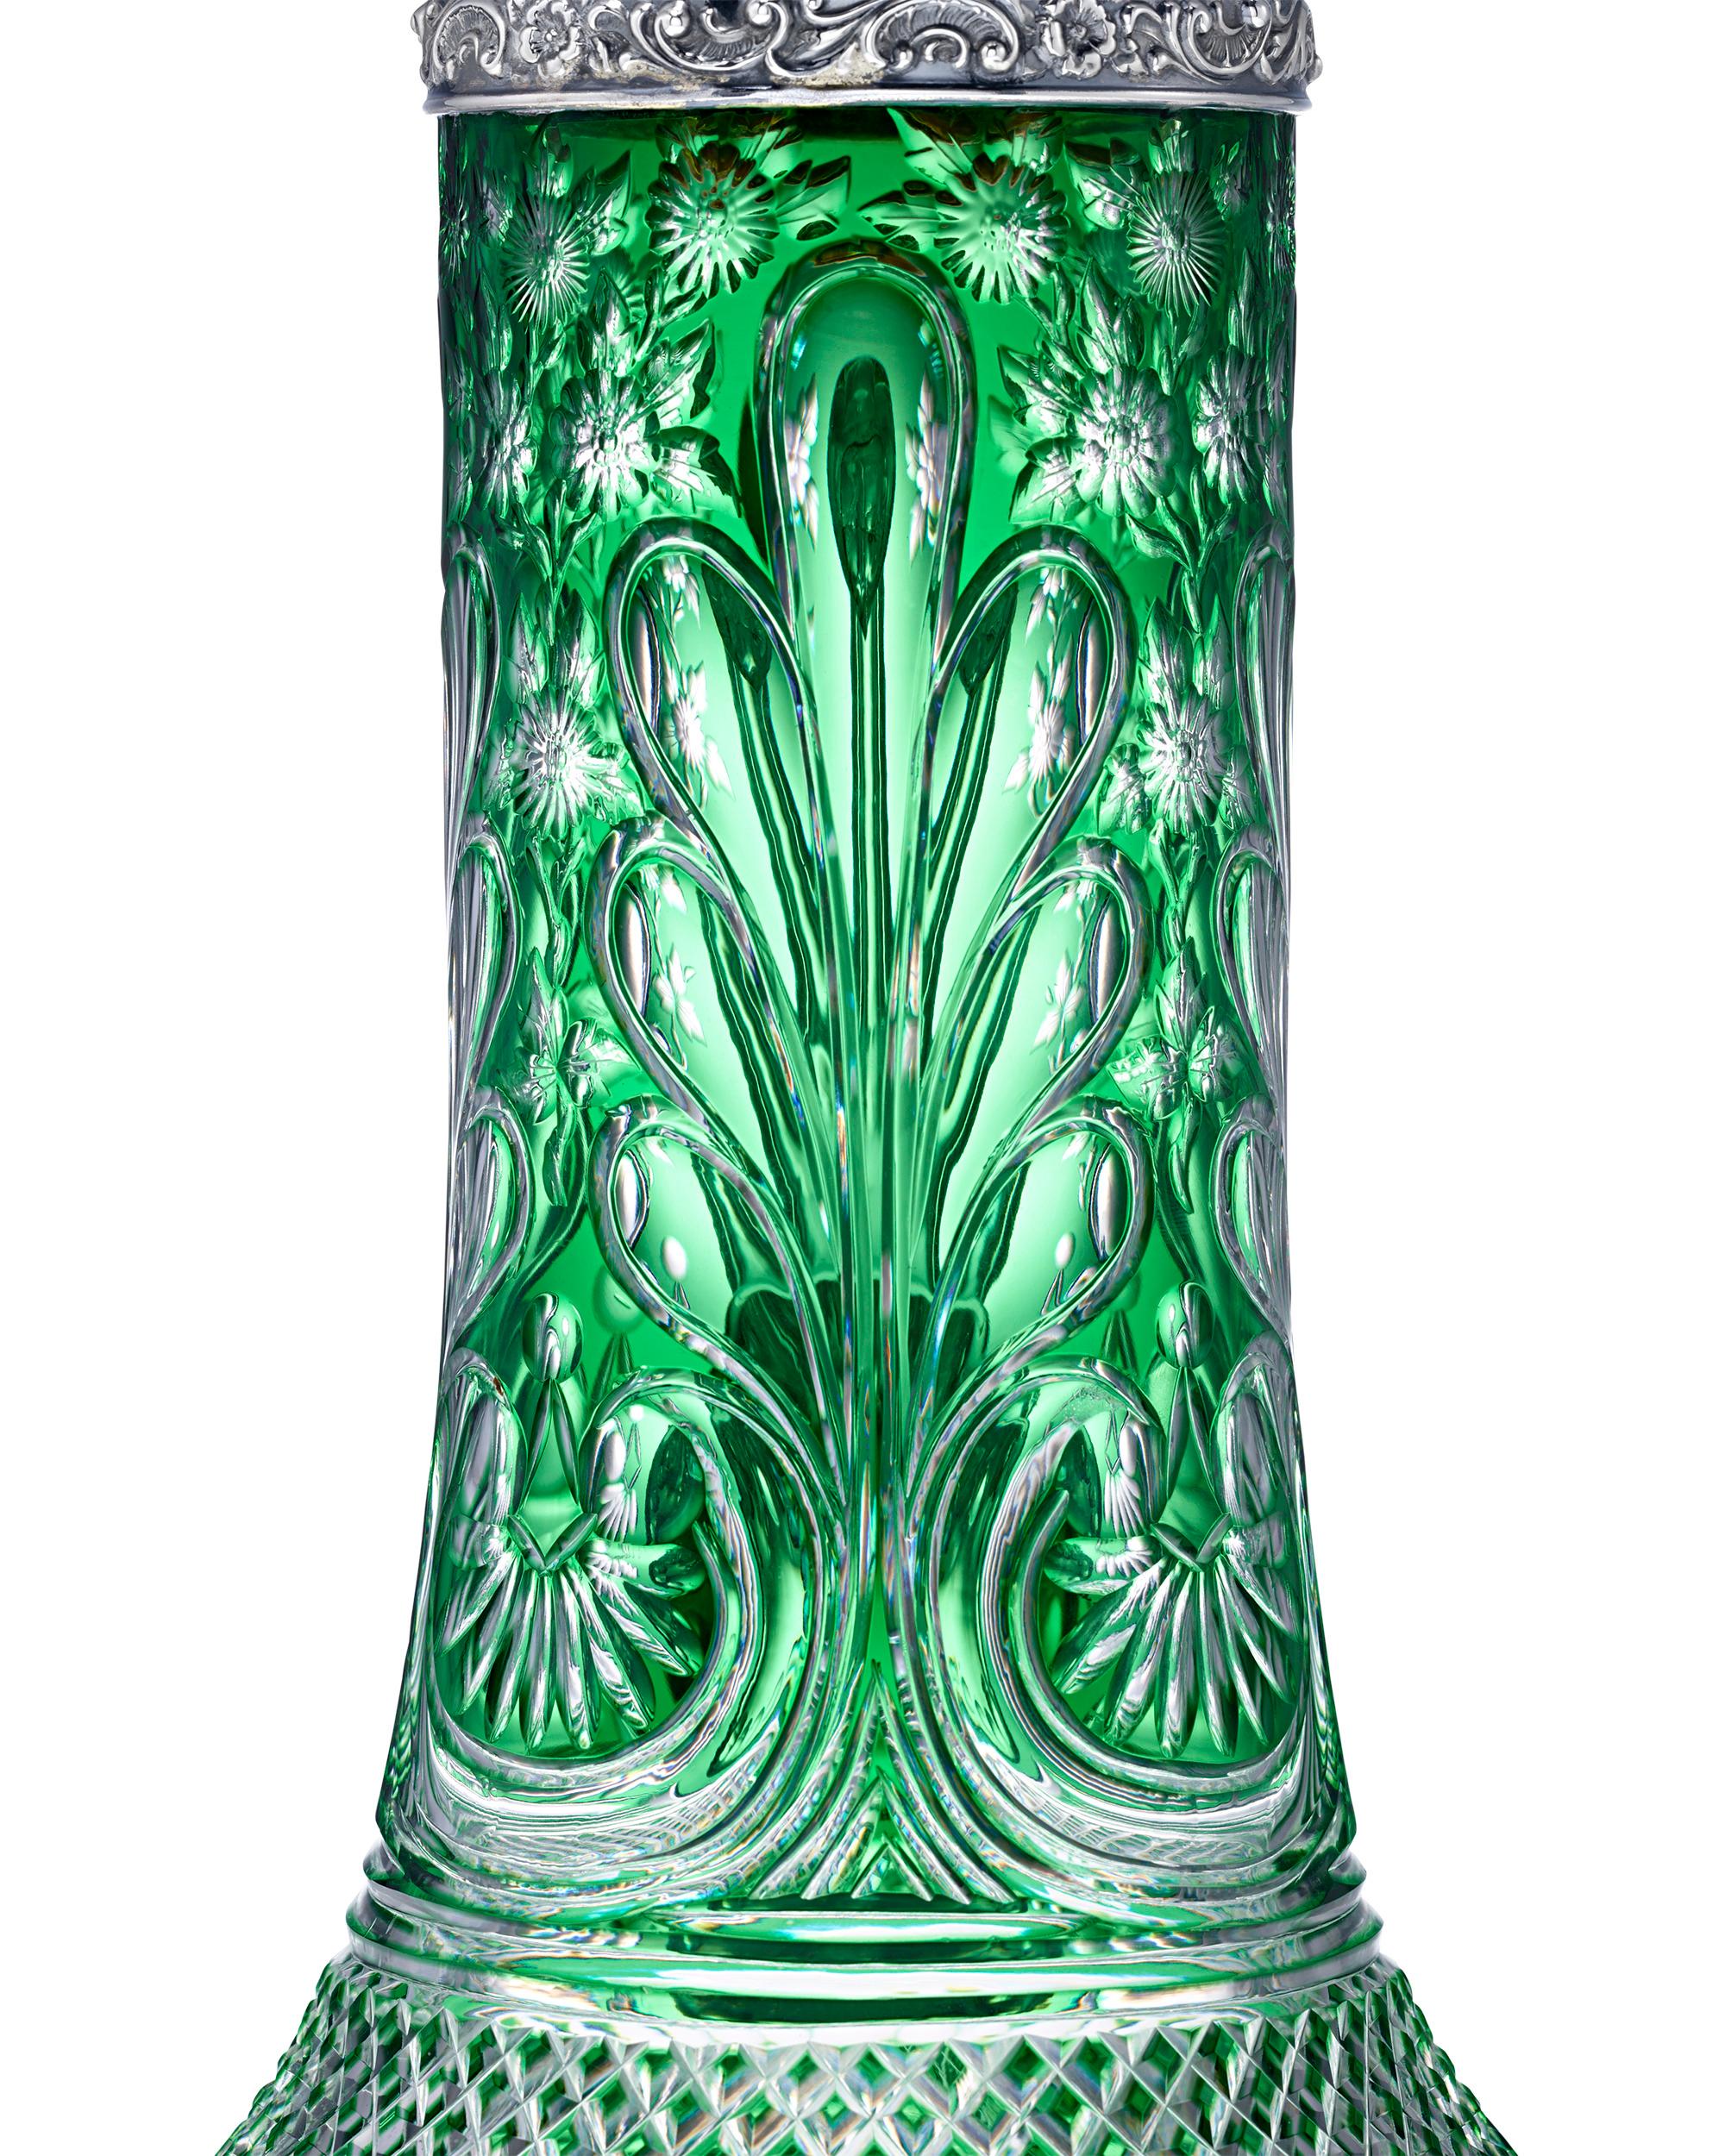 This mesmerizing green glass pitcher is set apart by its gorgeous color, enchanting design, and exquisitely repousséd silver top. Masterfully crafted by celebrated English glassmakers Stevens & Williams, the elaborate decoration is brilliantly cut